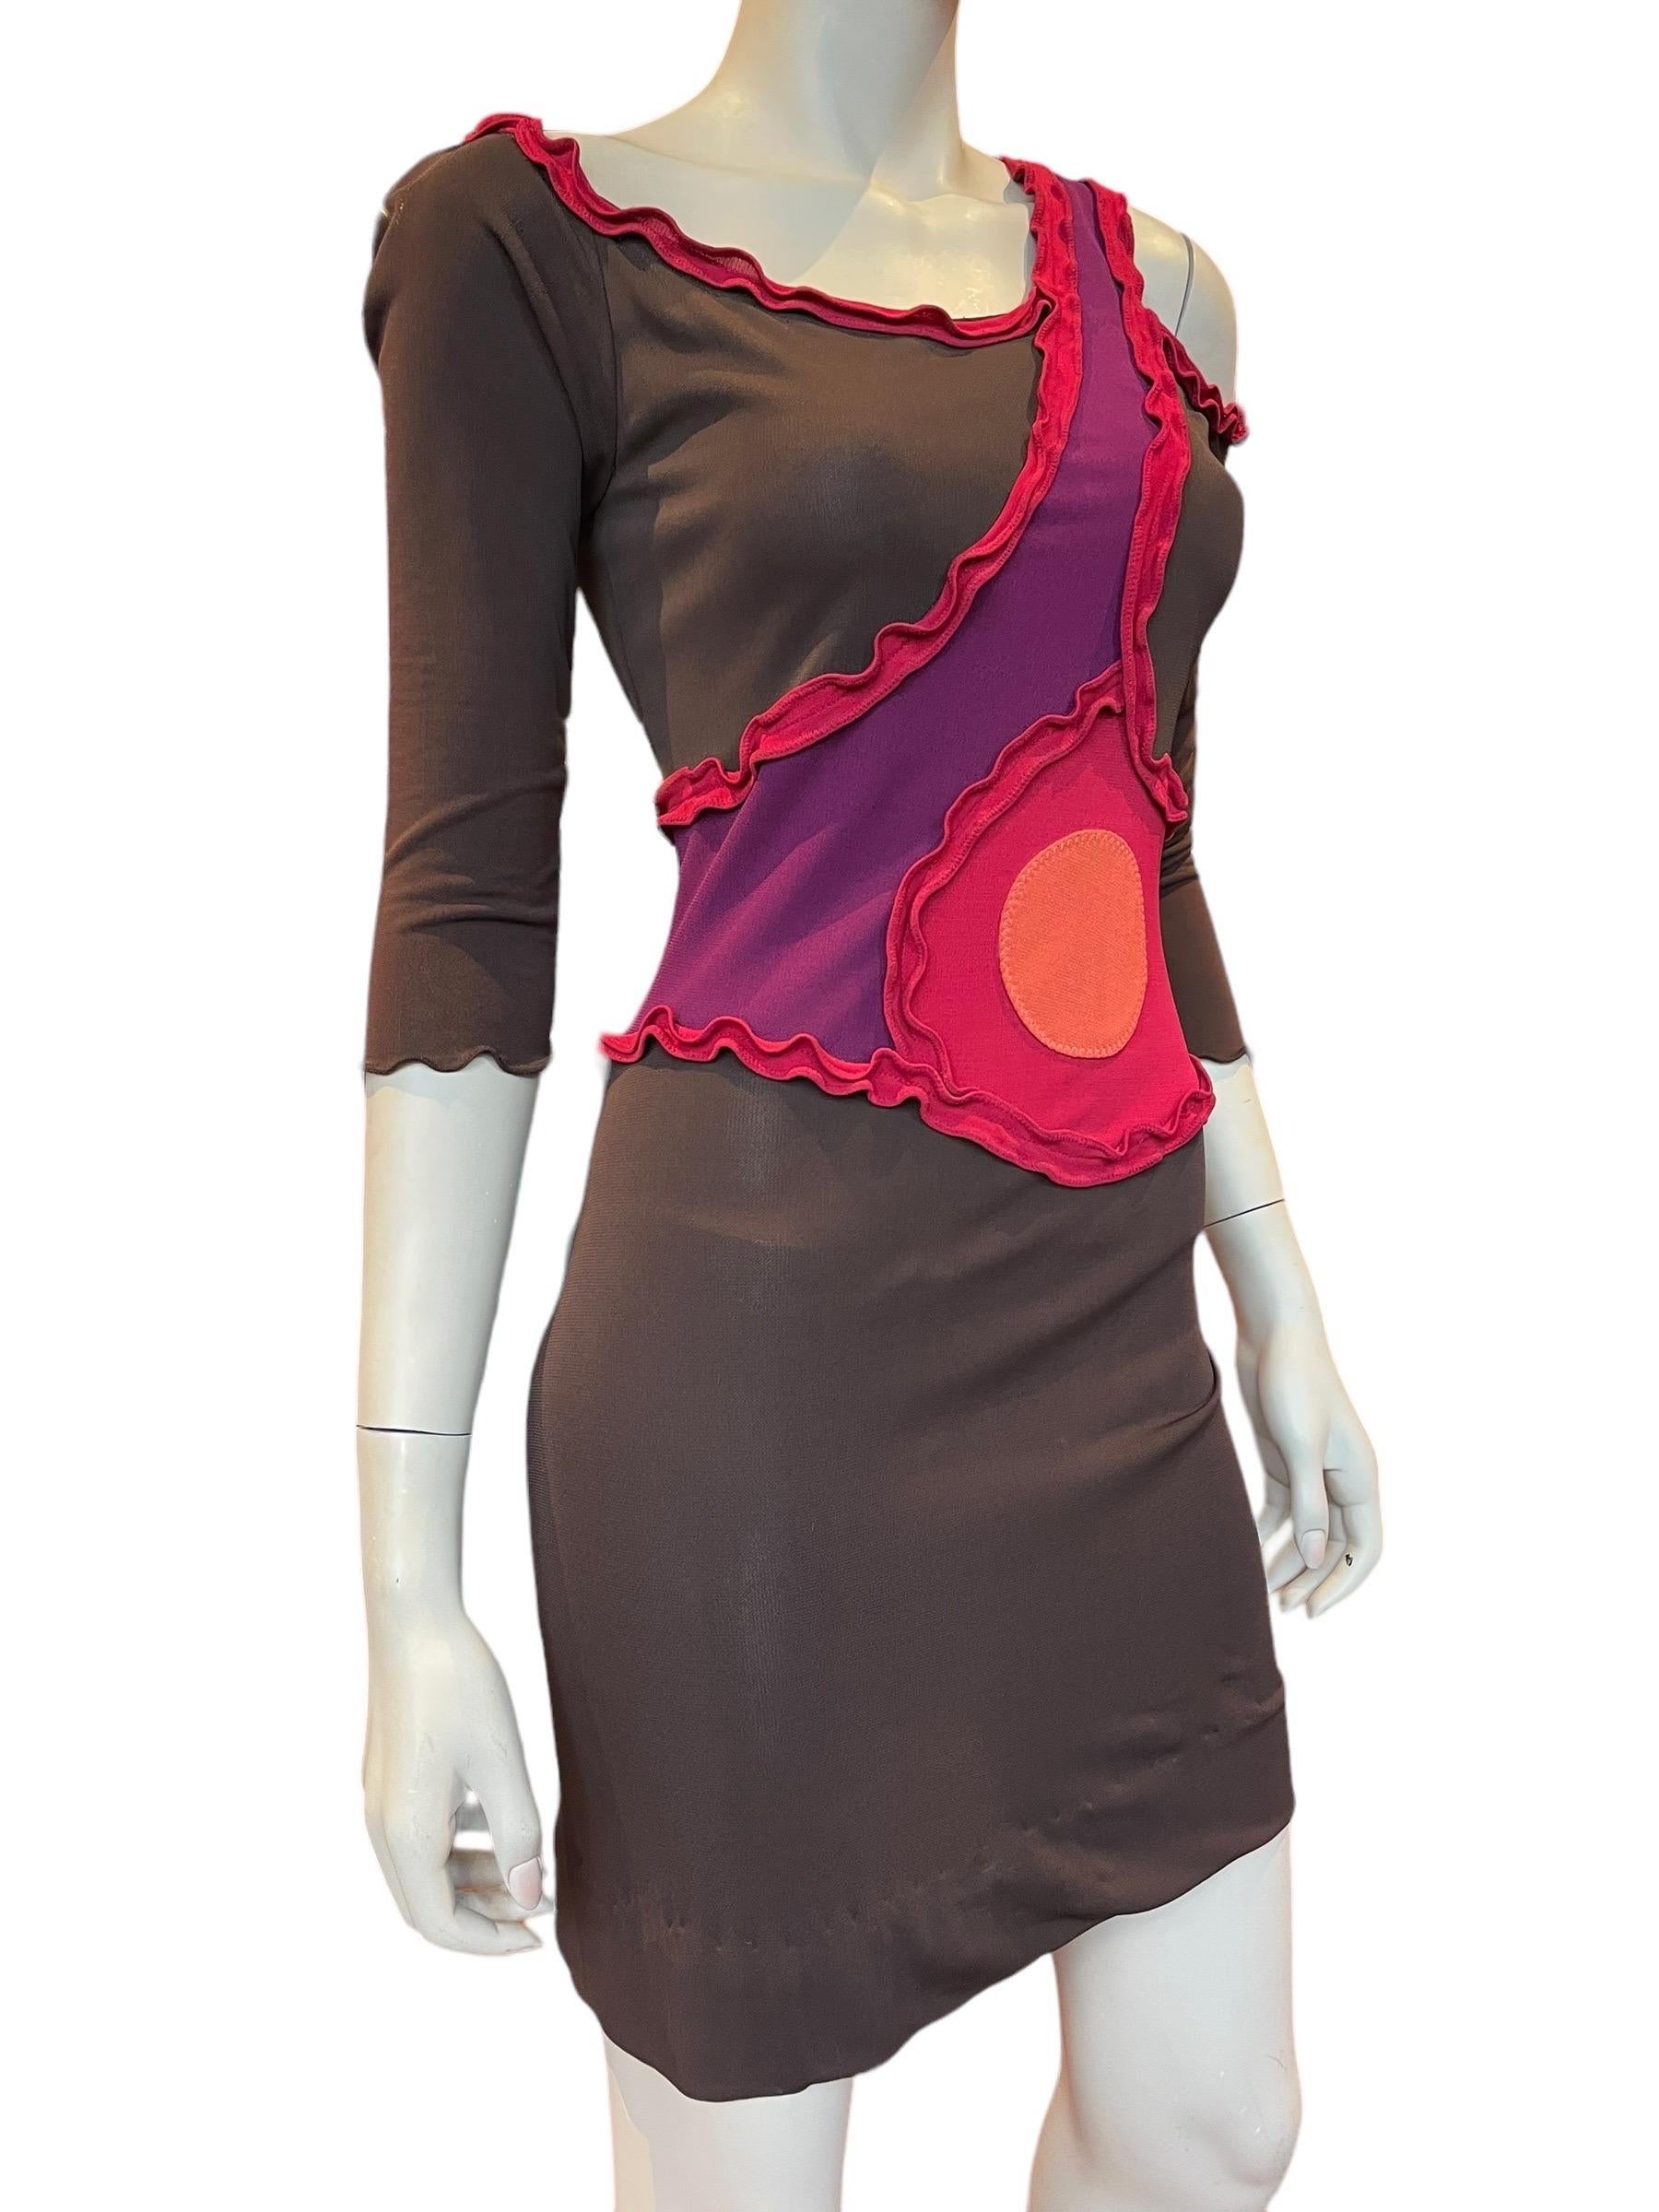 Y2K Stephen Burrows Asymmetrical MOD Design Dress 

This is truly an amazing and unique piece, mixing the defining time of the 60s MOD era with a Y2K twist. Colors of chocolate brown, red, purple, orange and a lettuce edge trim. An asymmetrical cut